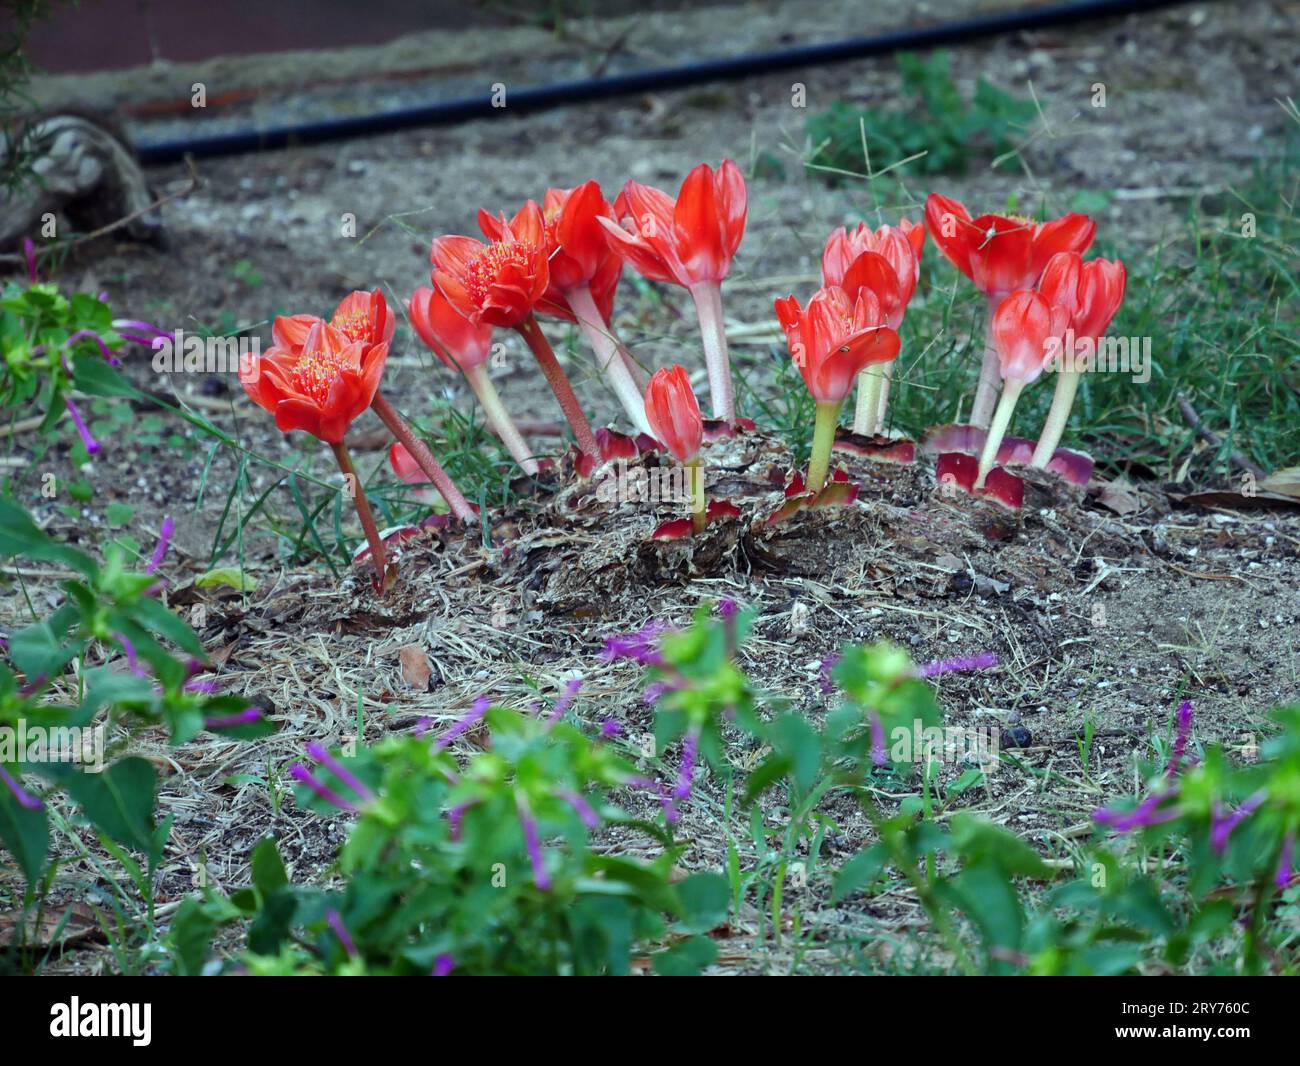 Blood Lily flower (haemanthus coccineus) close up in Sardinian garden Stock Photo